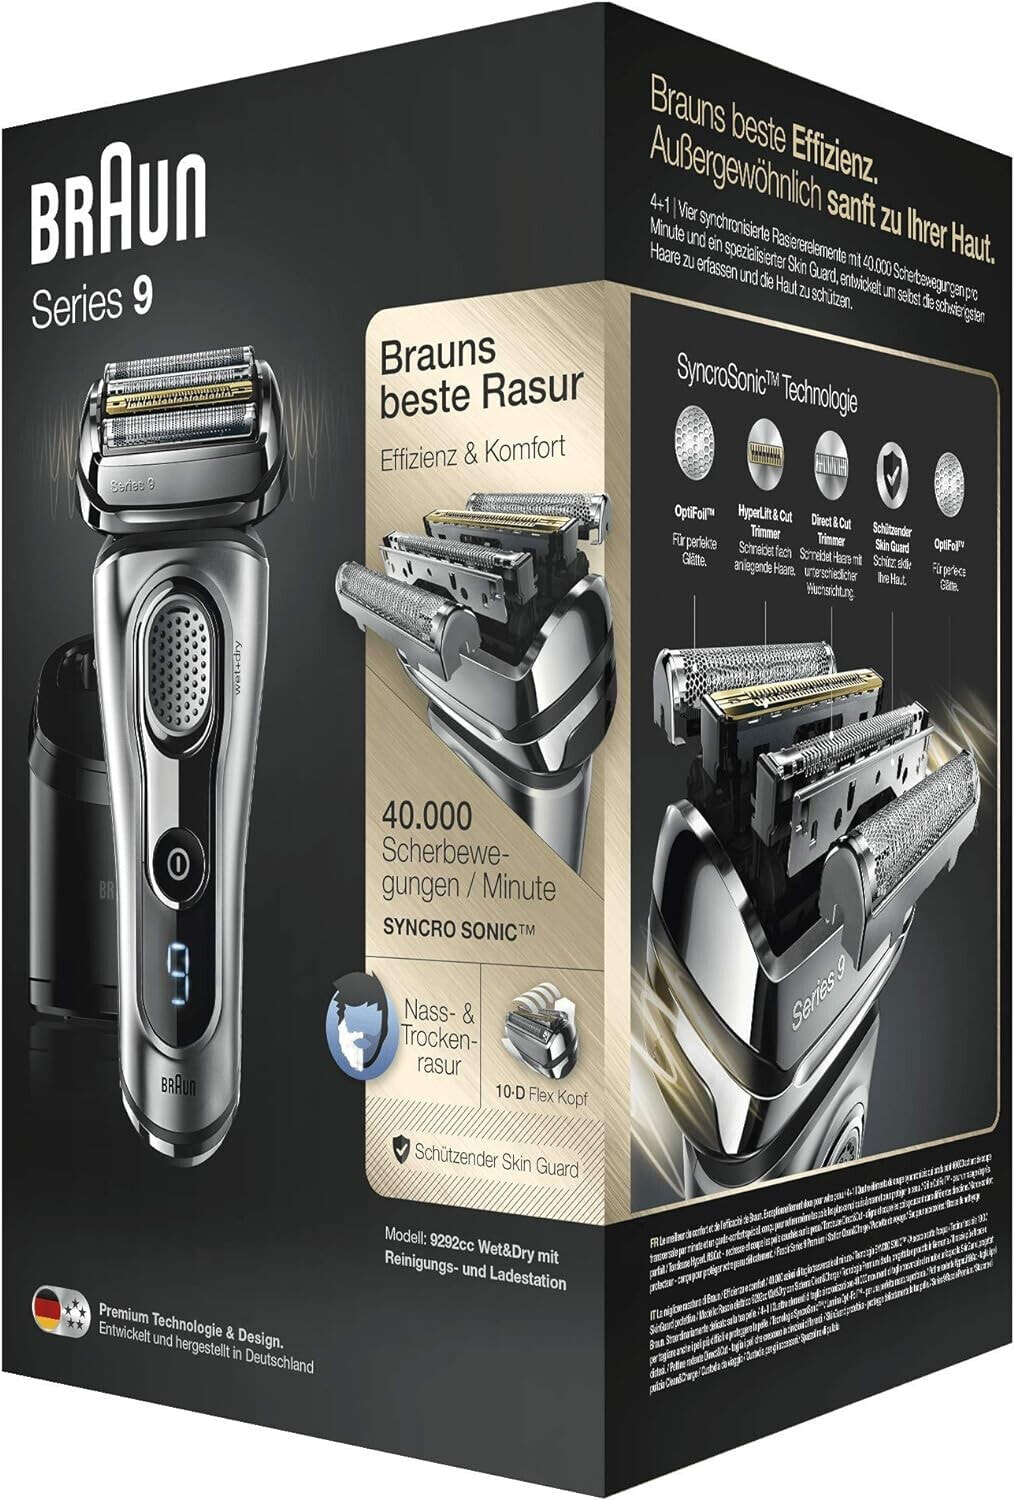 Braun Series 9 Electric Shaver, Silver, 9292cc (Discontinued Model)